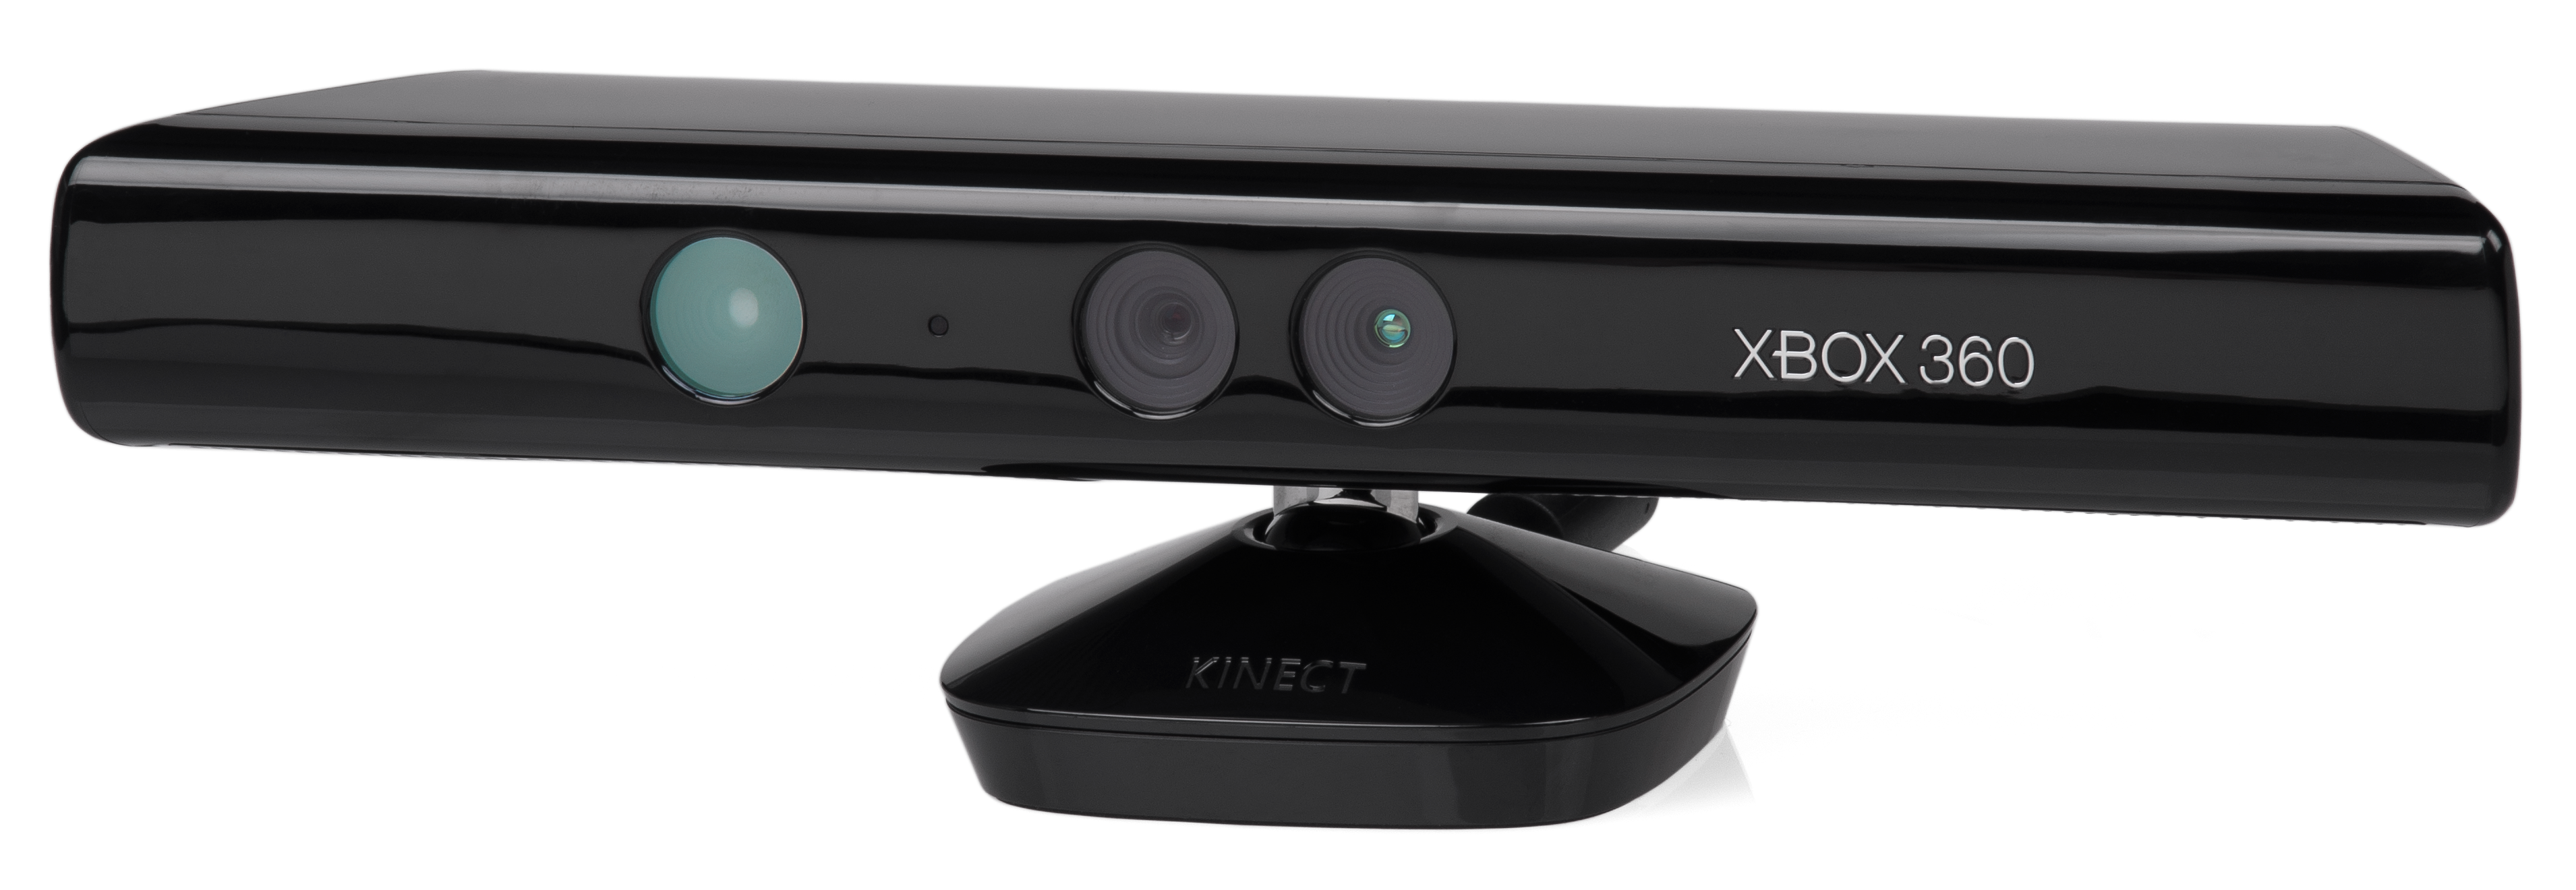 The Kinect Motion Controller for Xbox 360